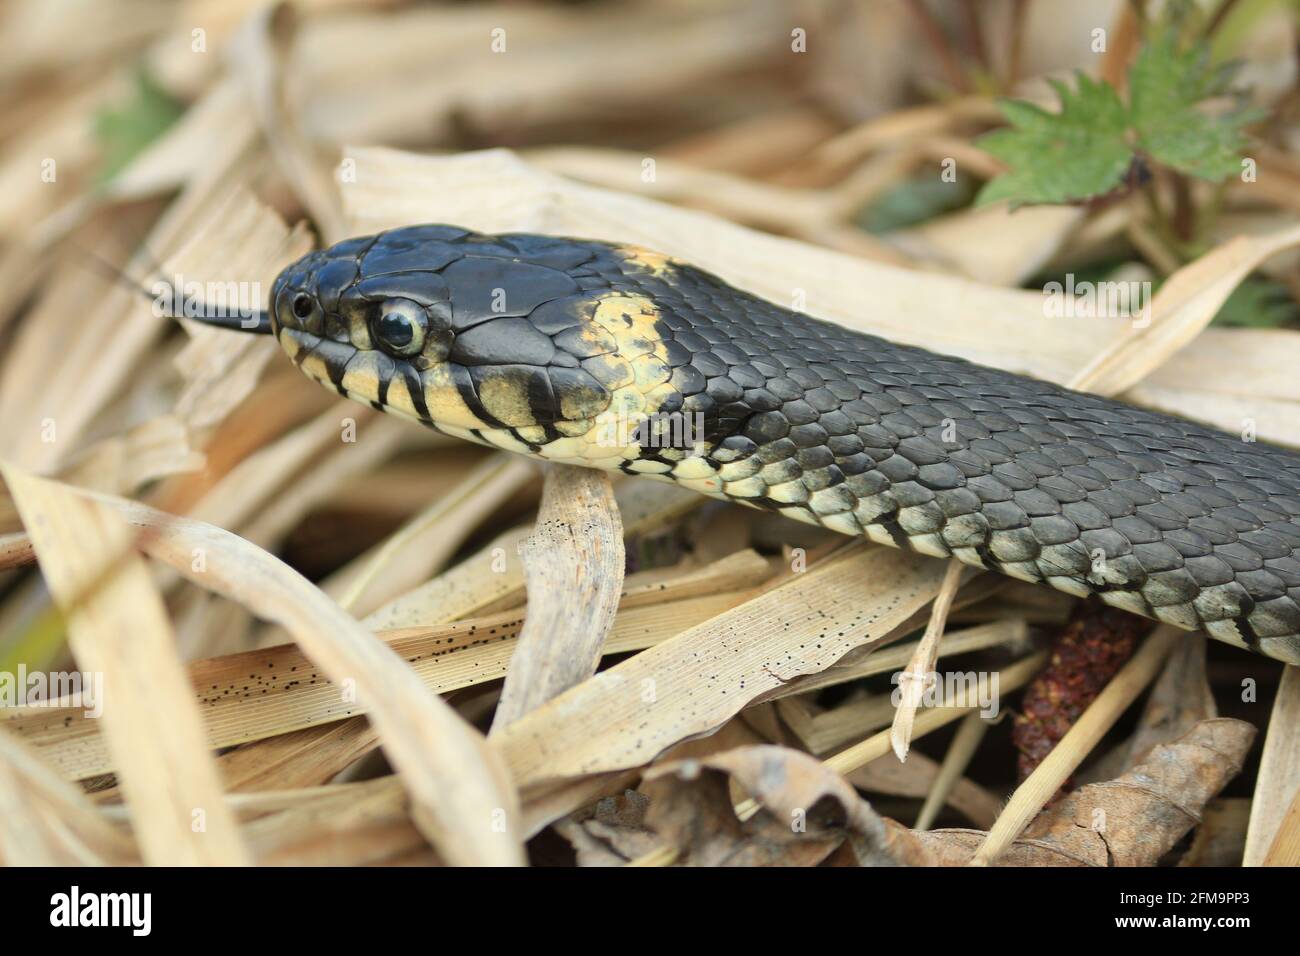 Natrix natrix or grass snake.  Close-up of a snake with its tongue hanging out in dry grass outdoors in spring. Stock Photo